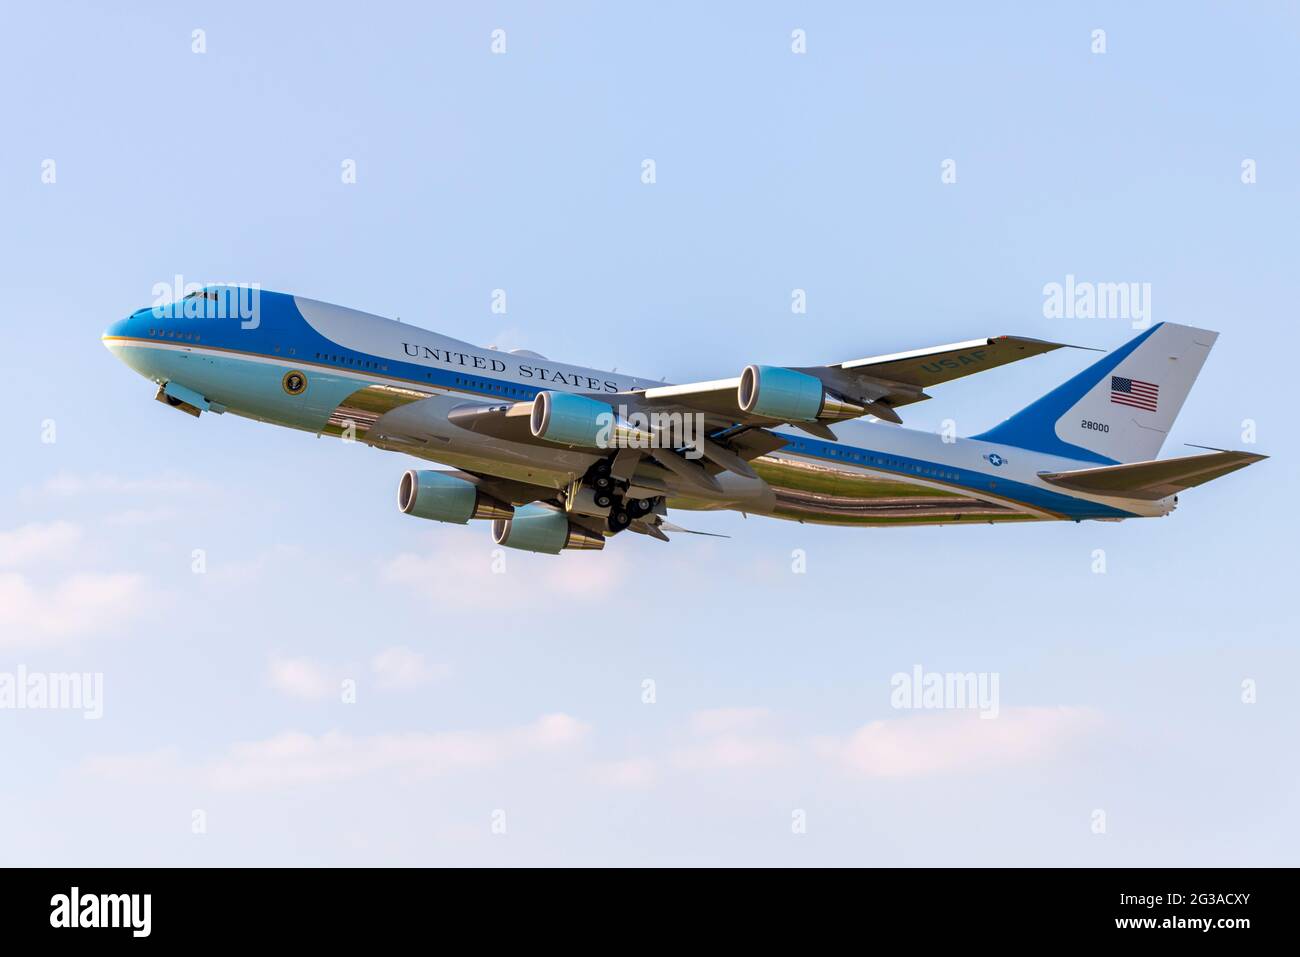 Air Force One jet plane with US President Joe Biden taking off from London Heathrow Airport, UK, bound for Brussels after G7 summit. Boeing VC-25A Stock Photo